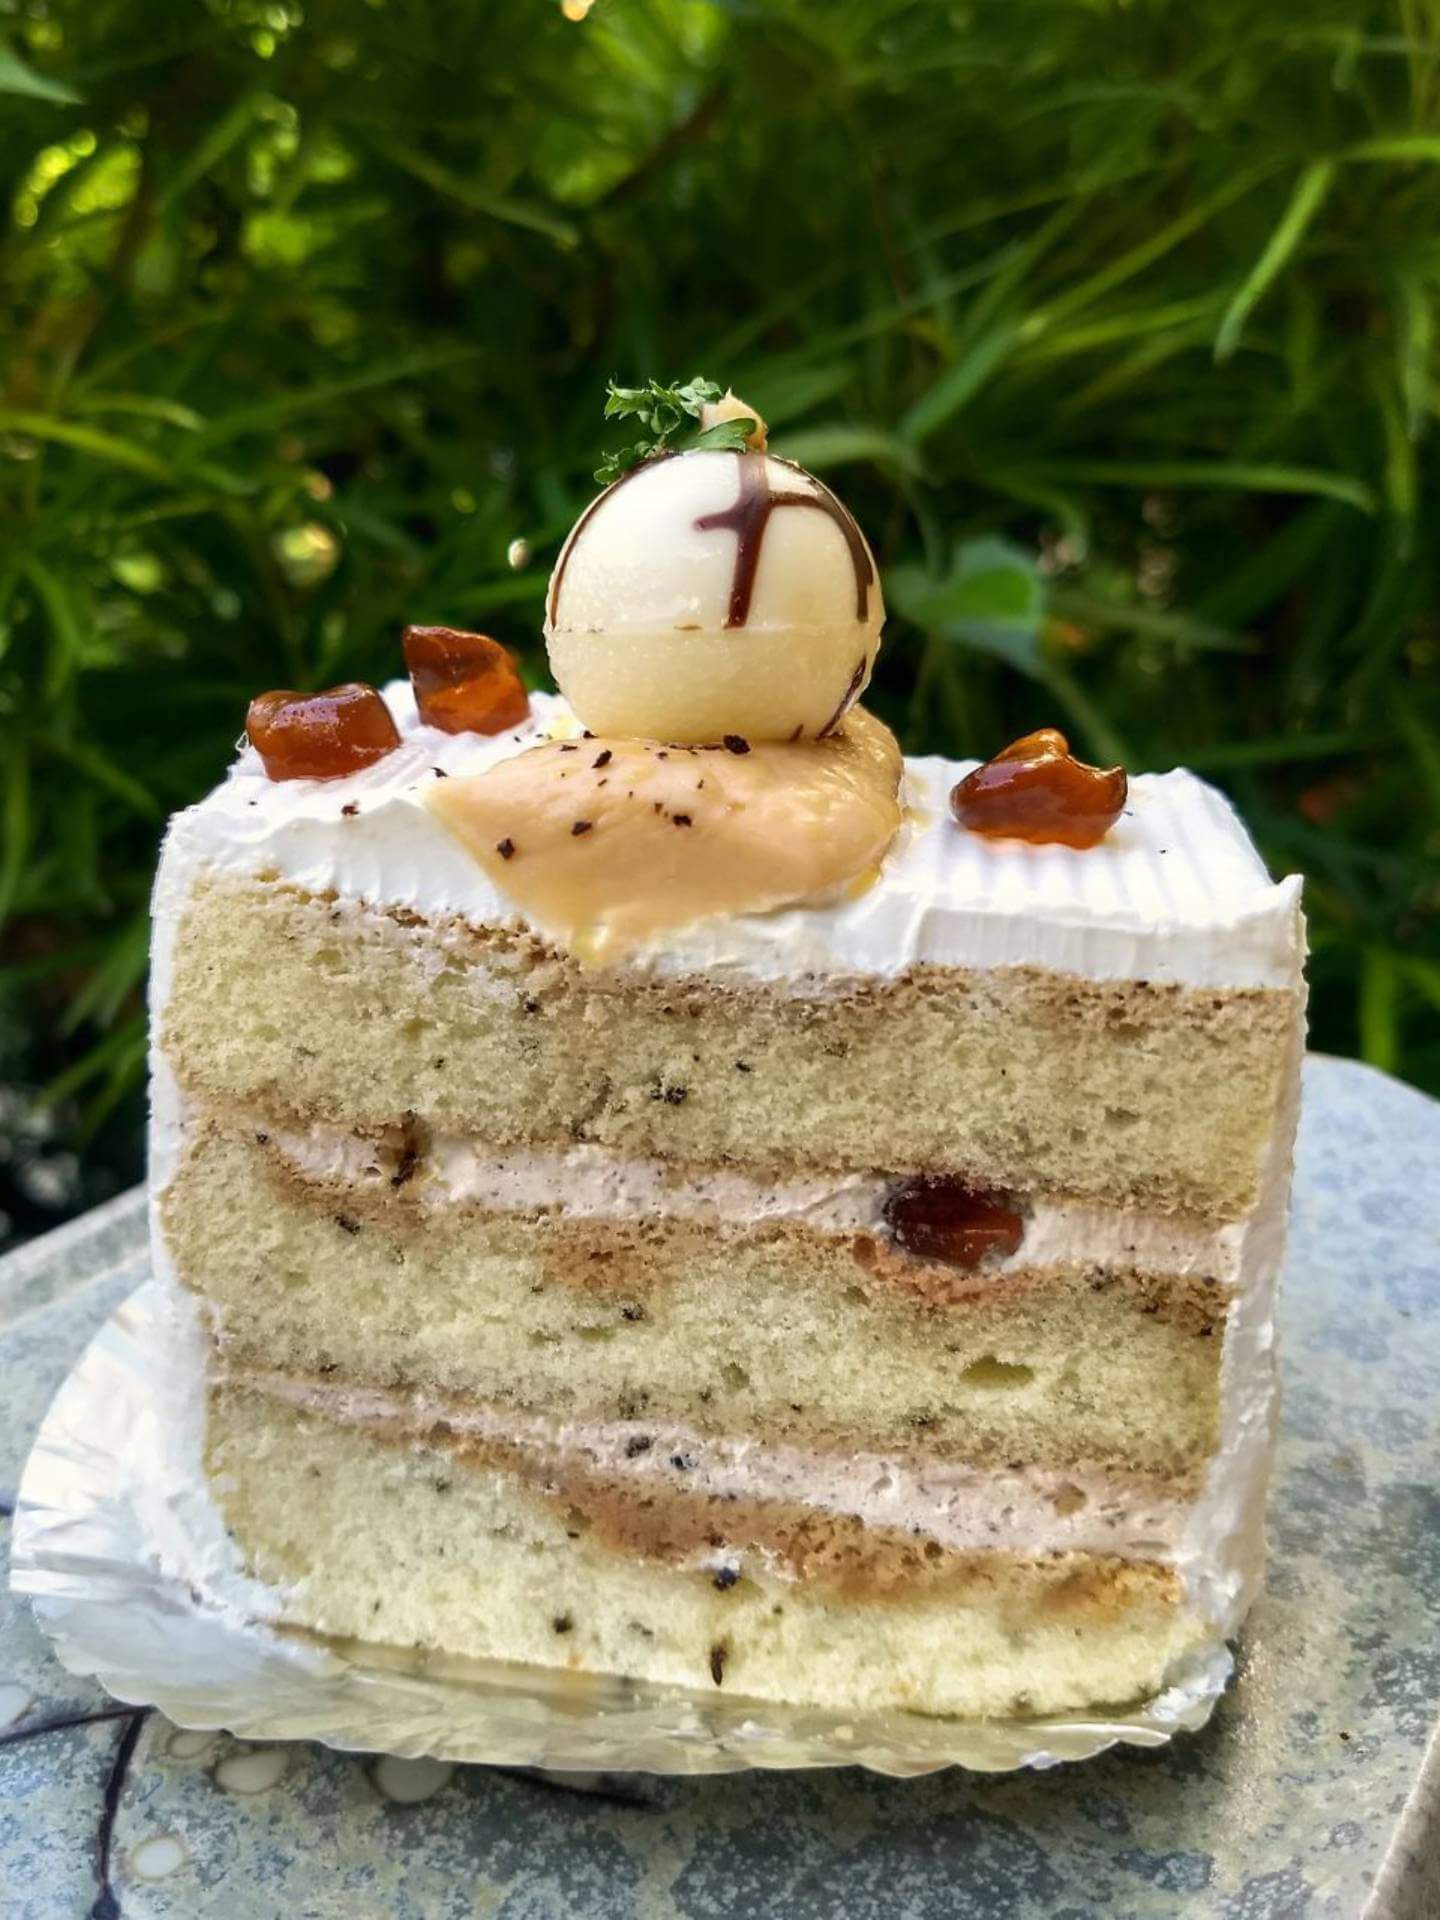 This Bakery Sells White Rabbit Cake Until 31 May & You Can Try It for Less Than RM14! - WORLD OF BUZZ